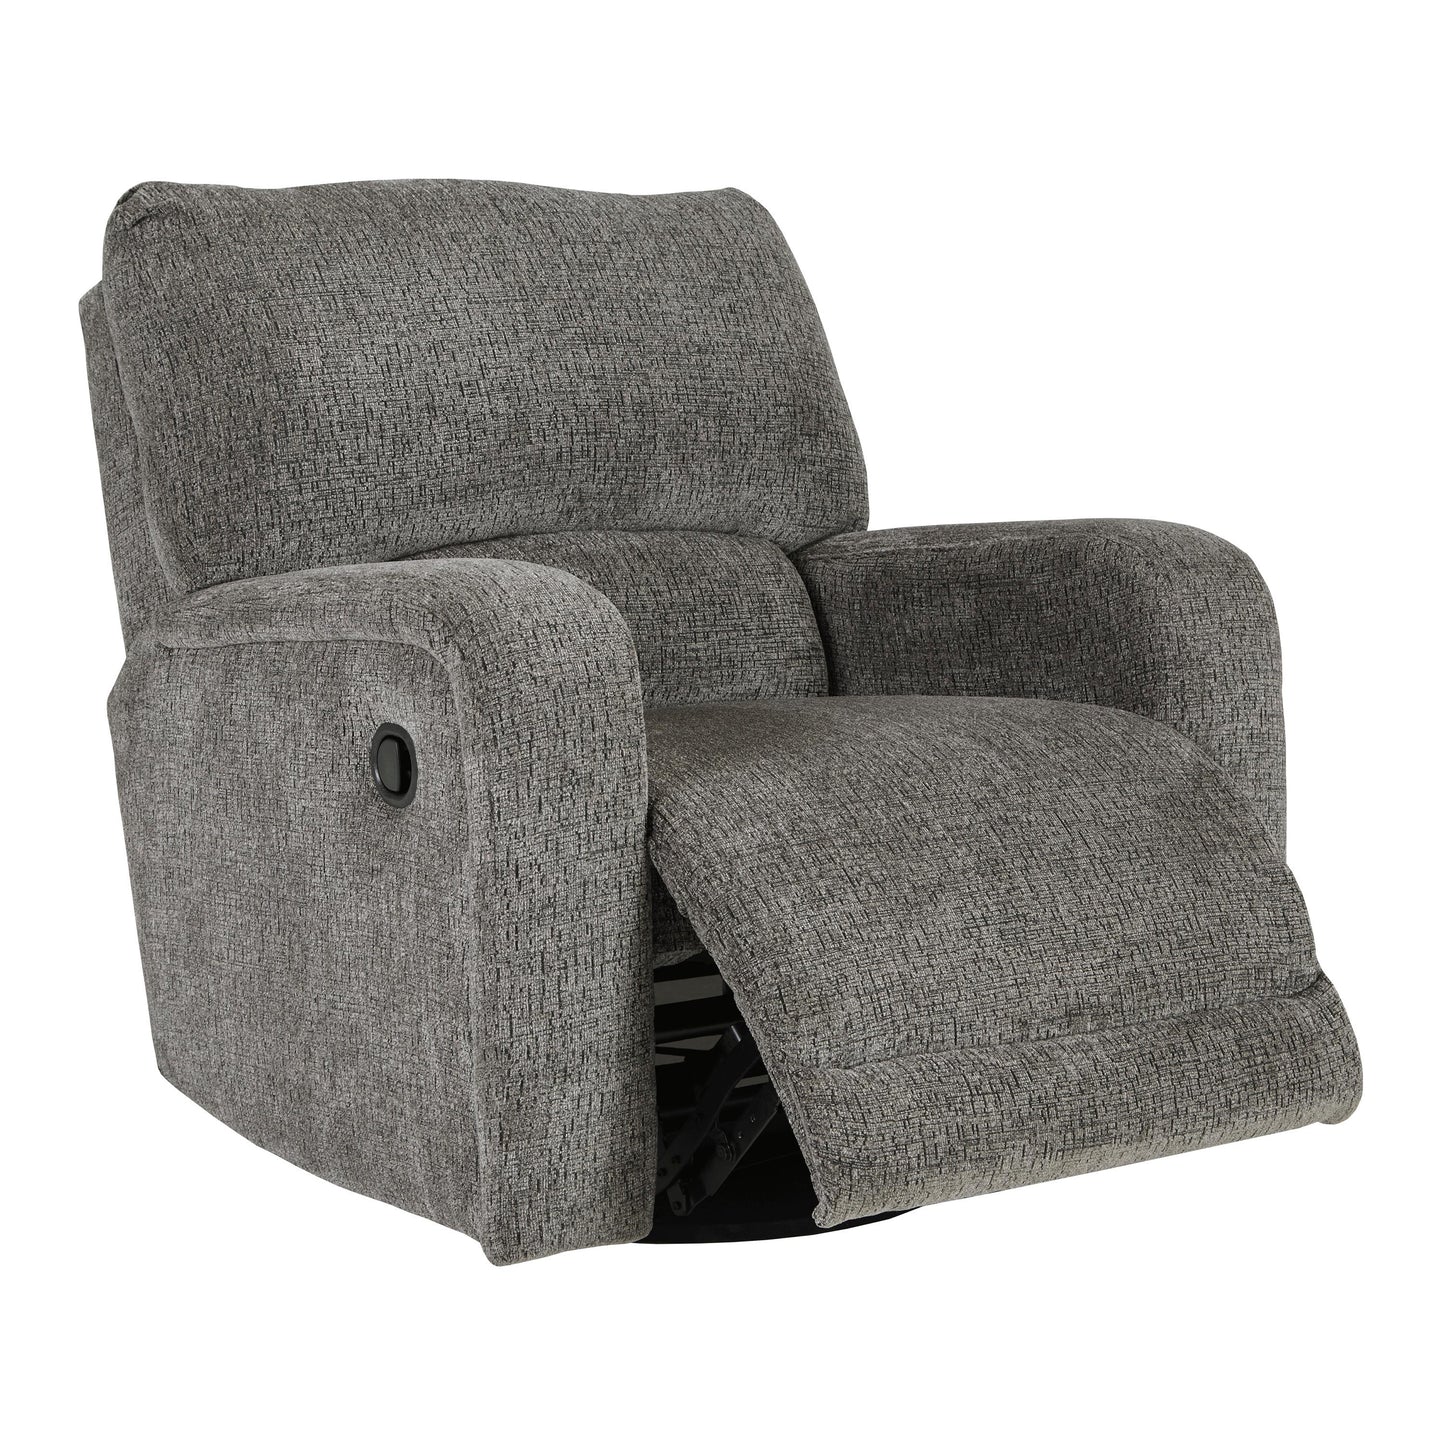 Signature Design by Ashley Wittlich Swivel Glider Fabric Recliner 5690161 IMAGE 2